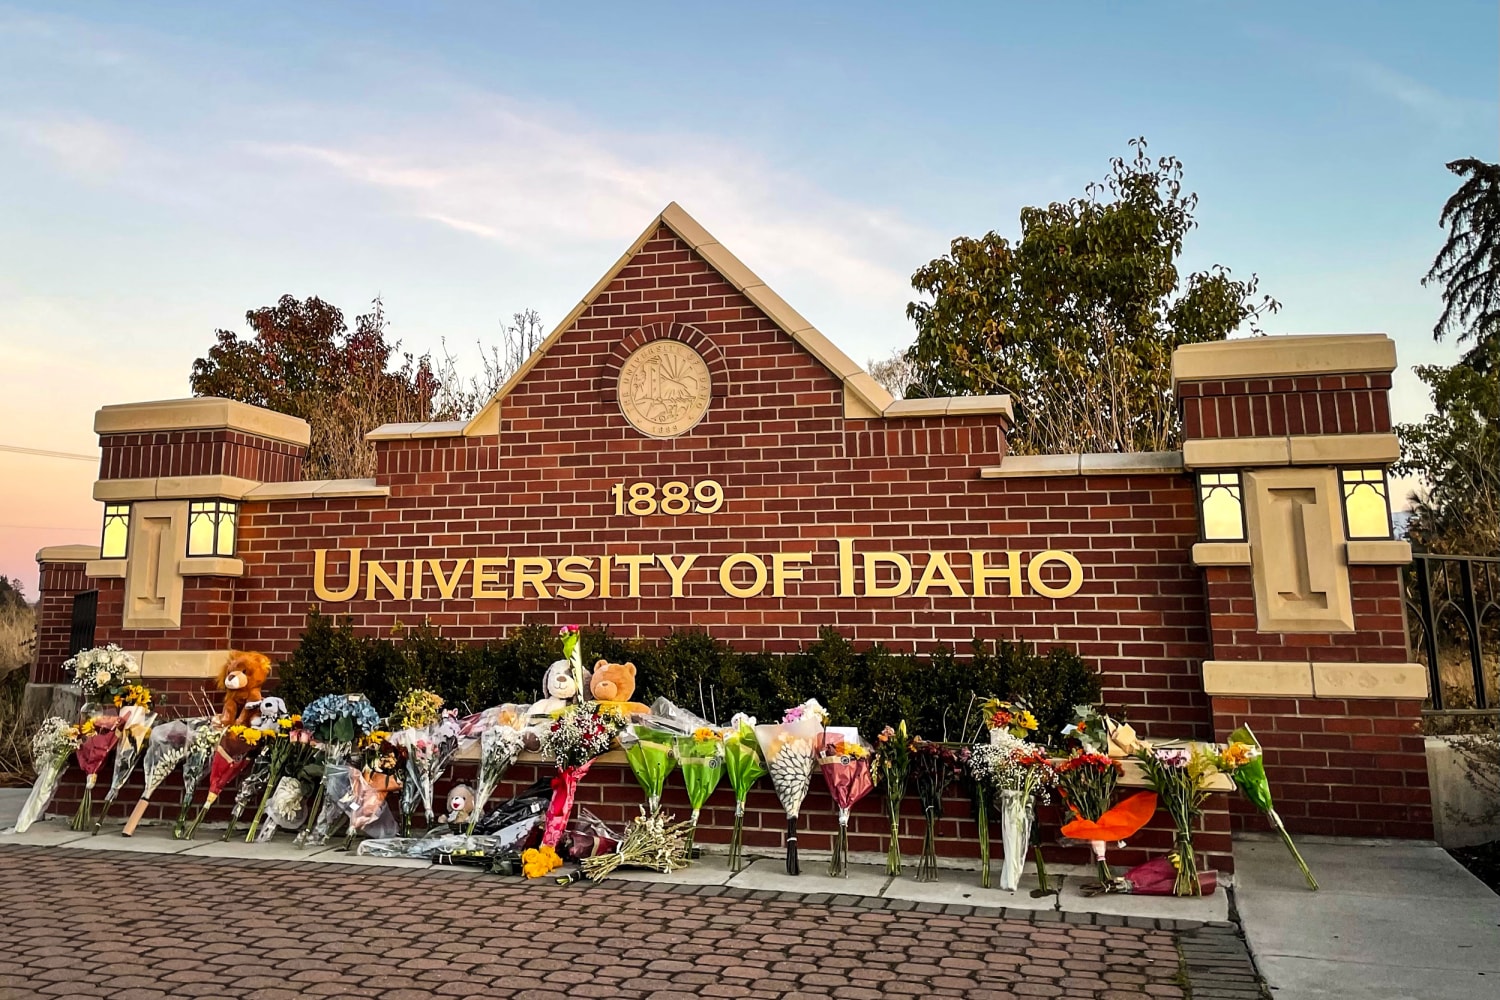 Cops unsure University of Idaho students were targeted